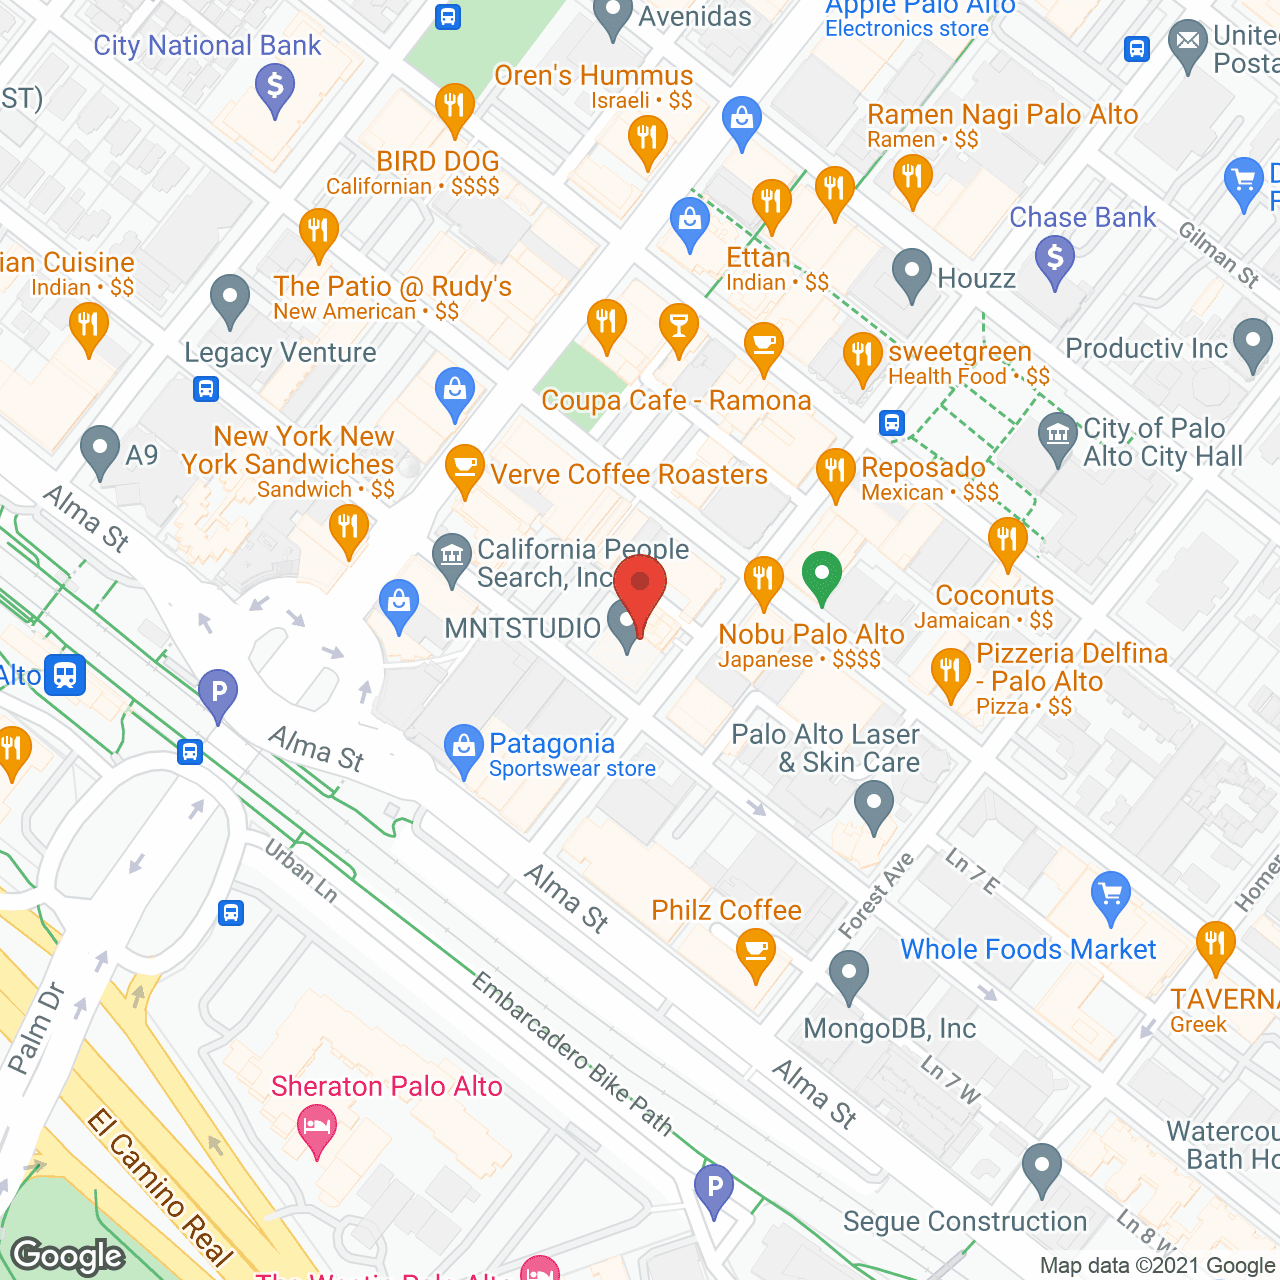 Personal Assistance Research in google map